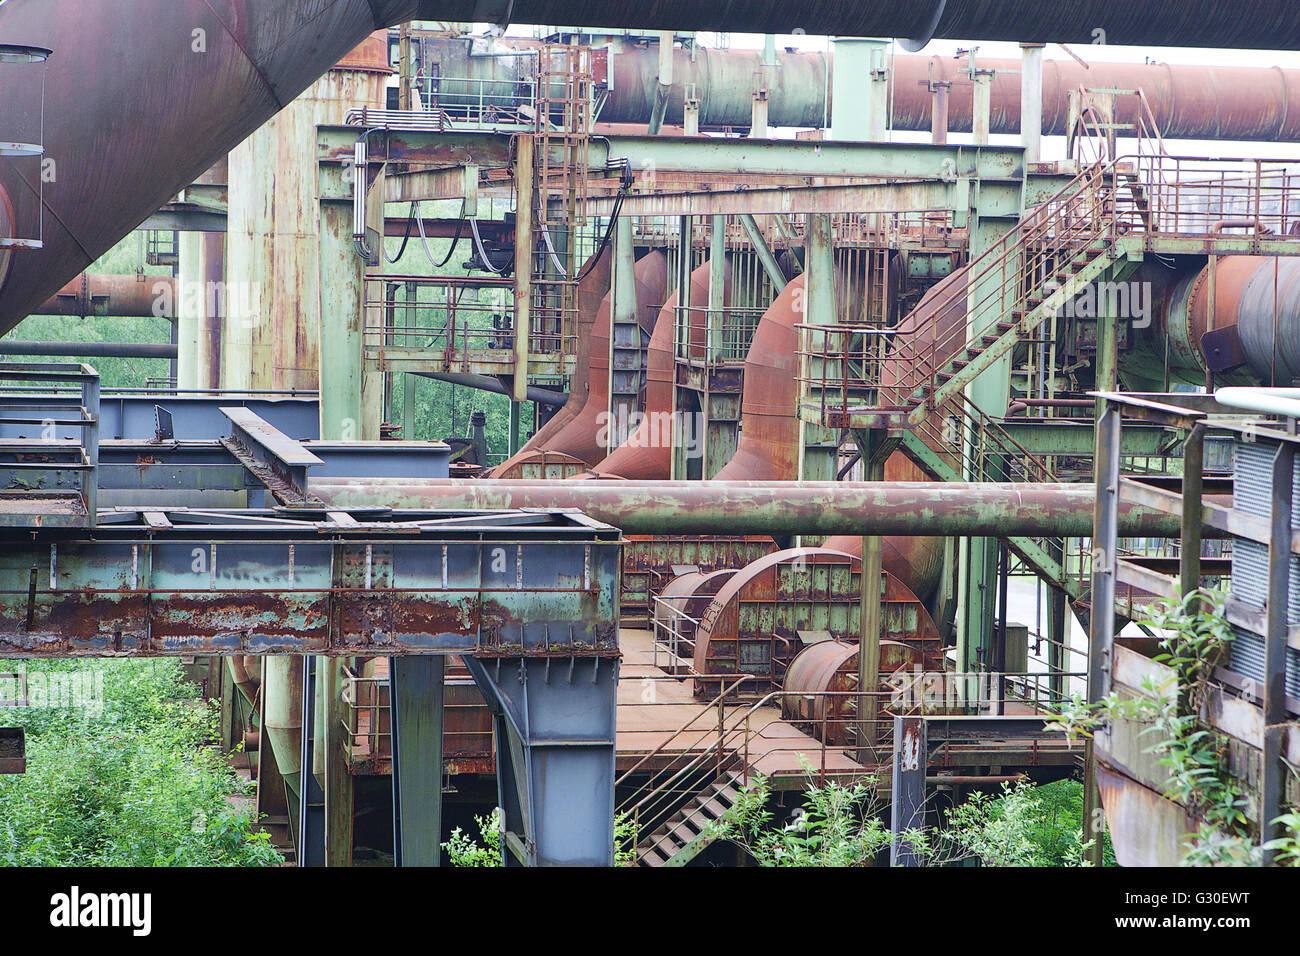 Nature takes over old boiler house. Stock Photo